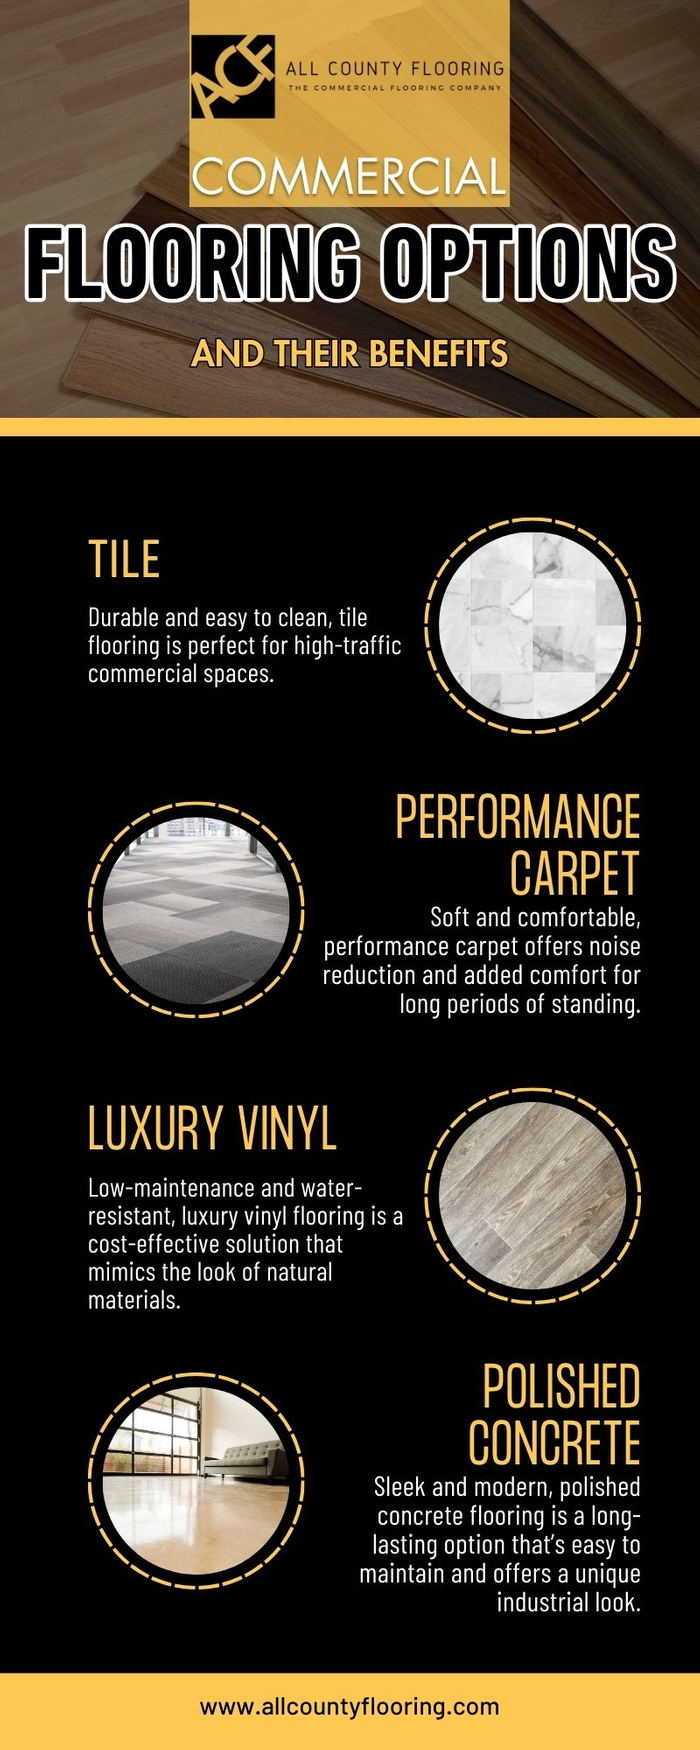 M37778 - Infographic - Commercial Flooring Options.jpg